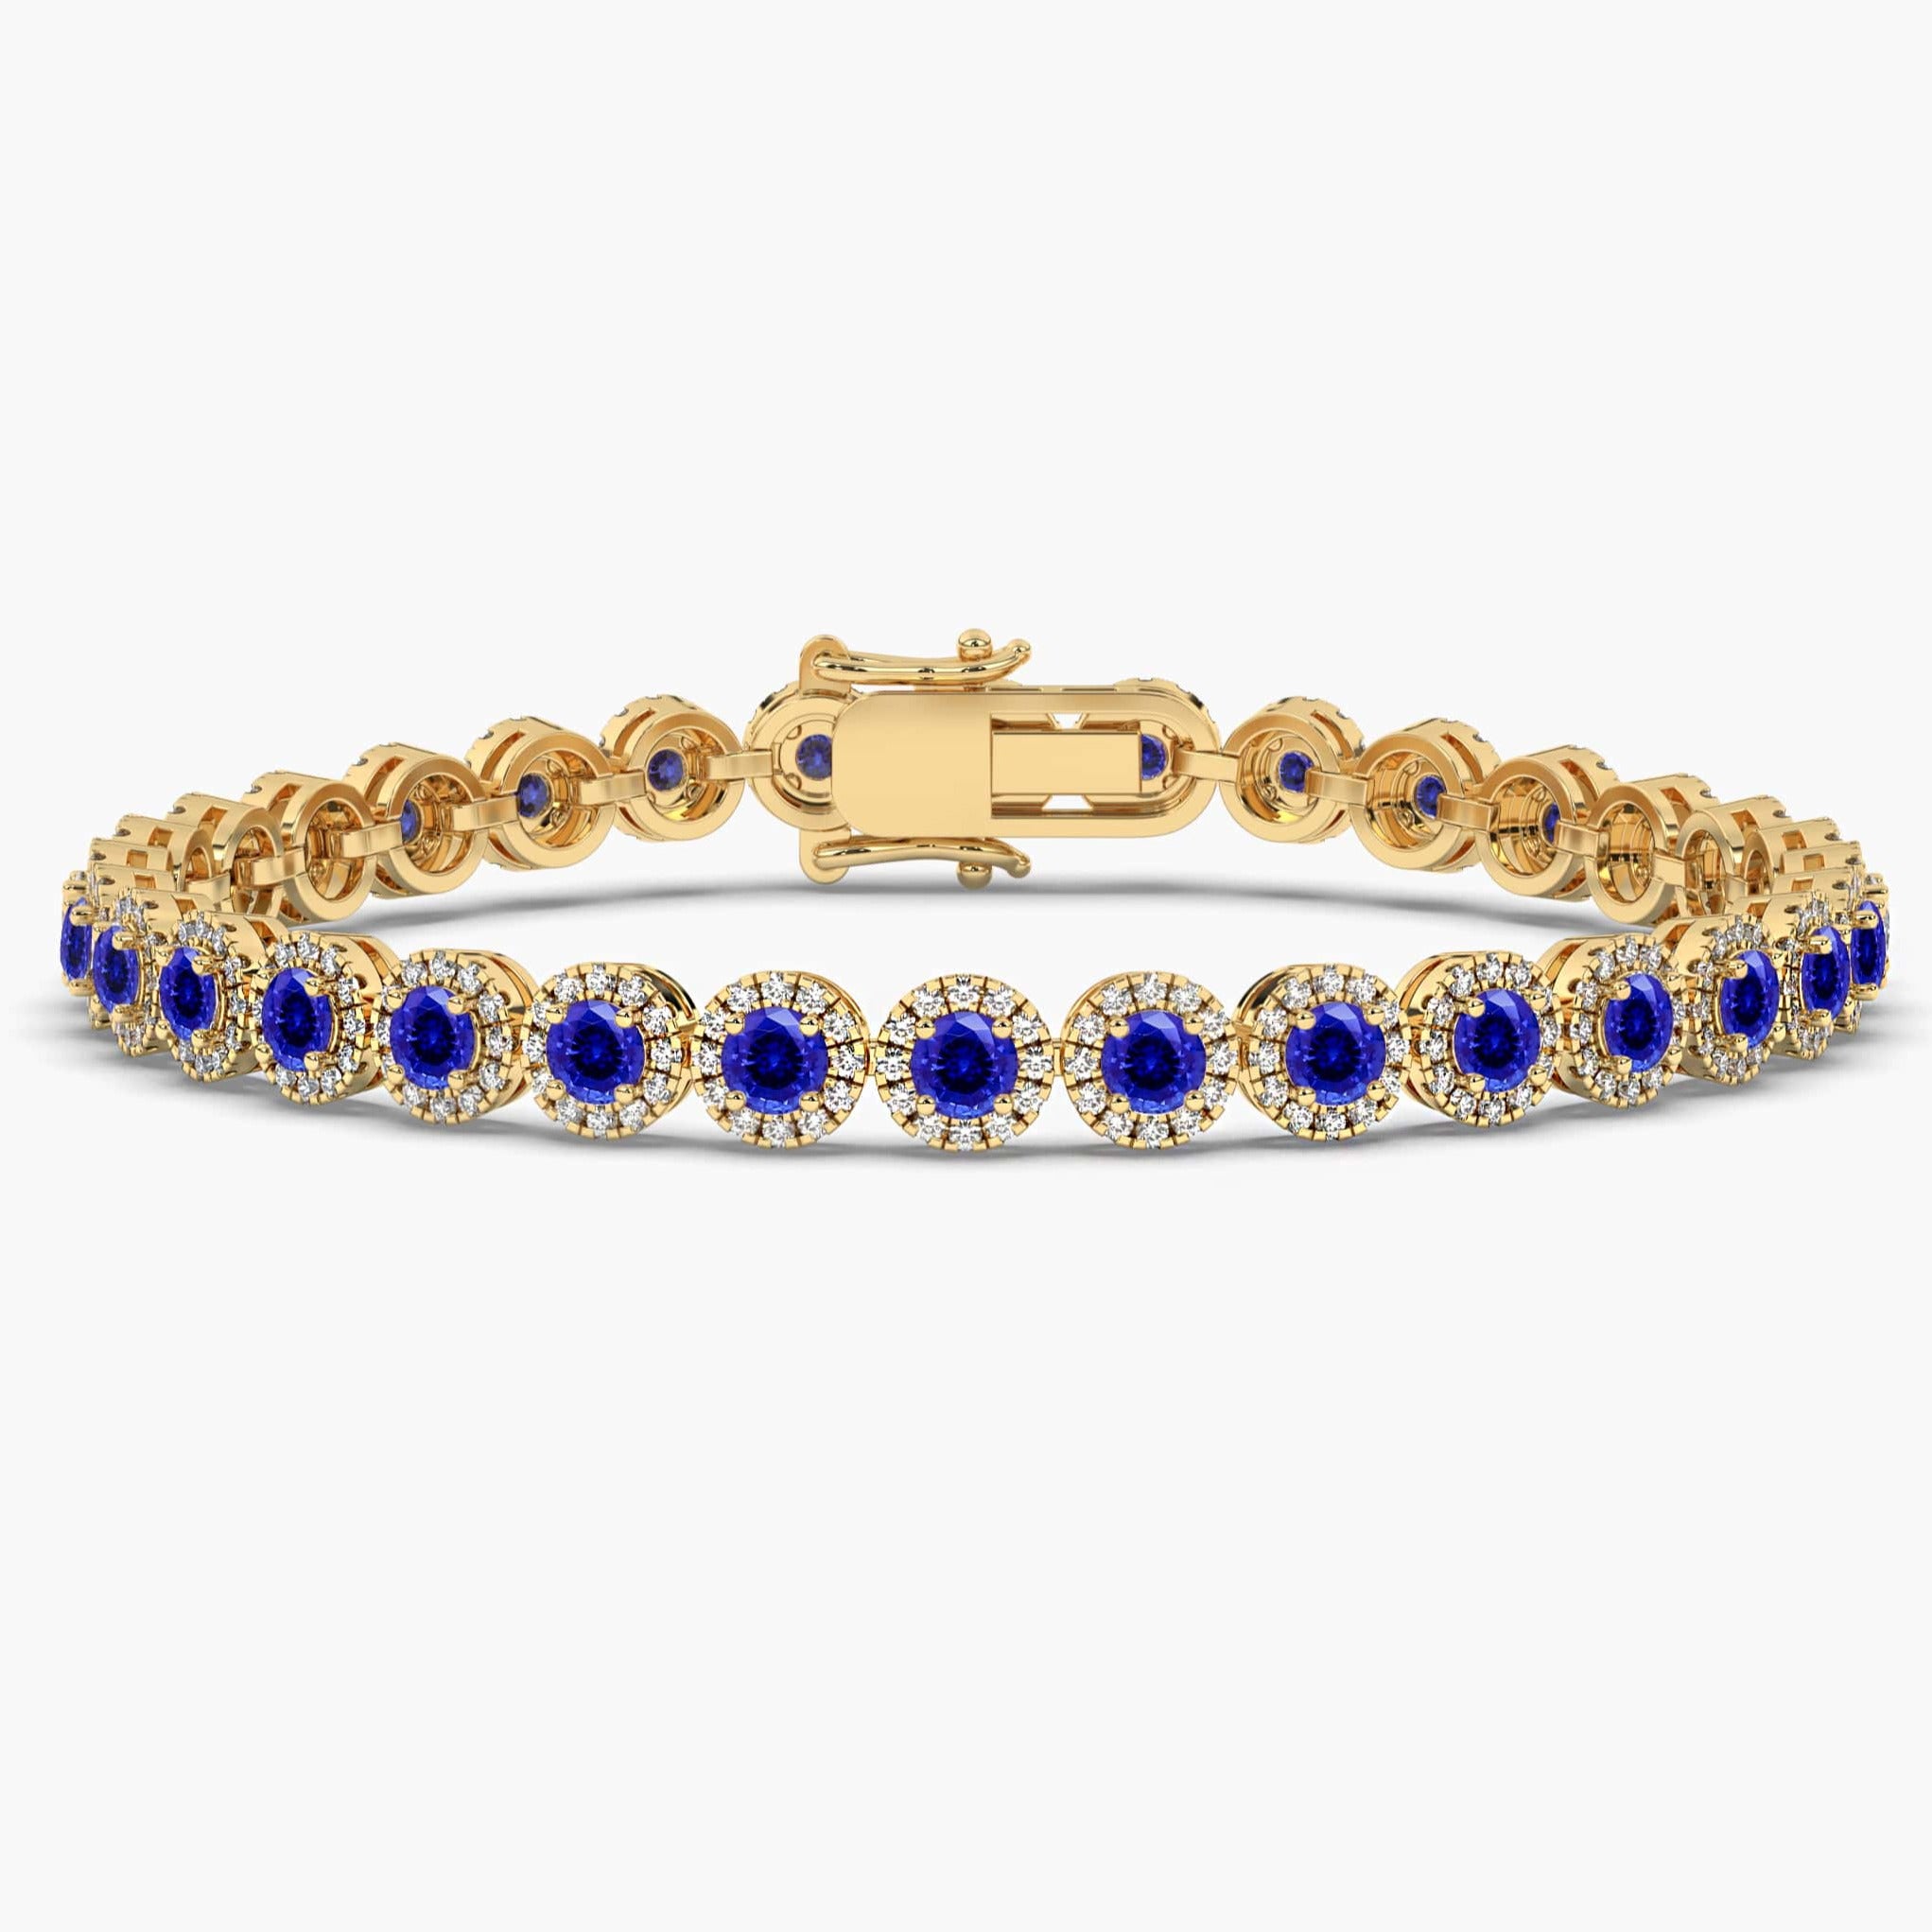 Round Cut Blue Sapphire and Diamond Bracelet in Yellow Gold